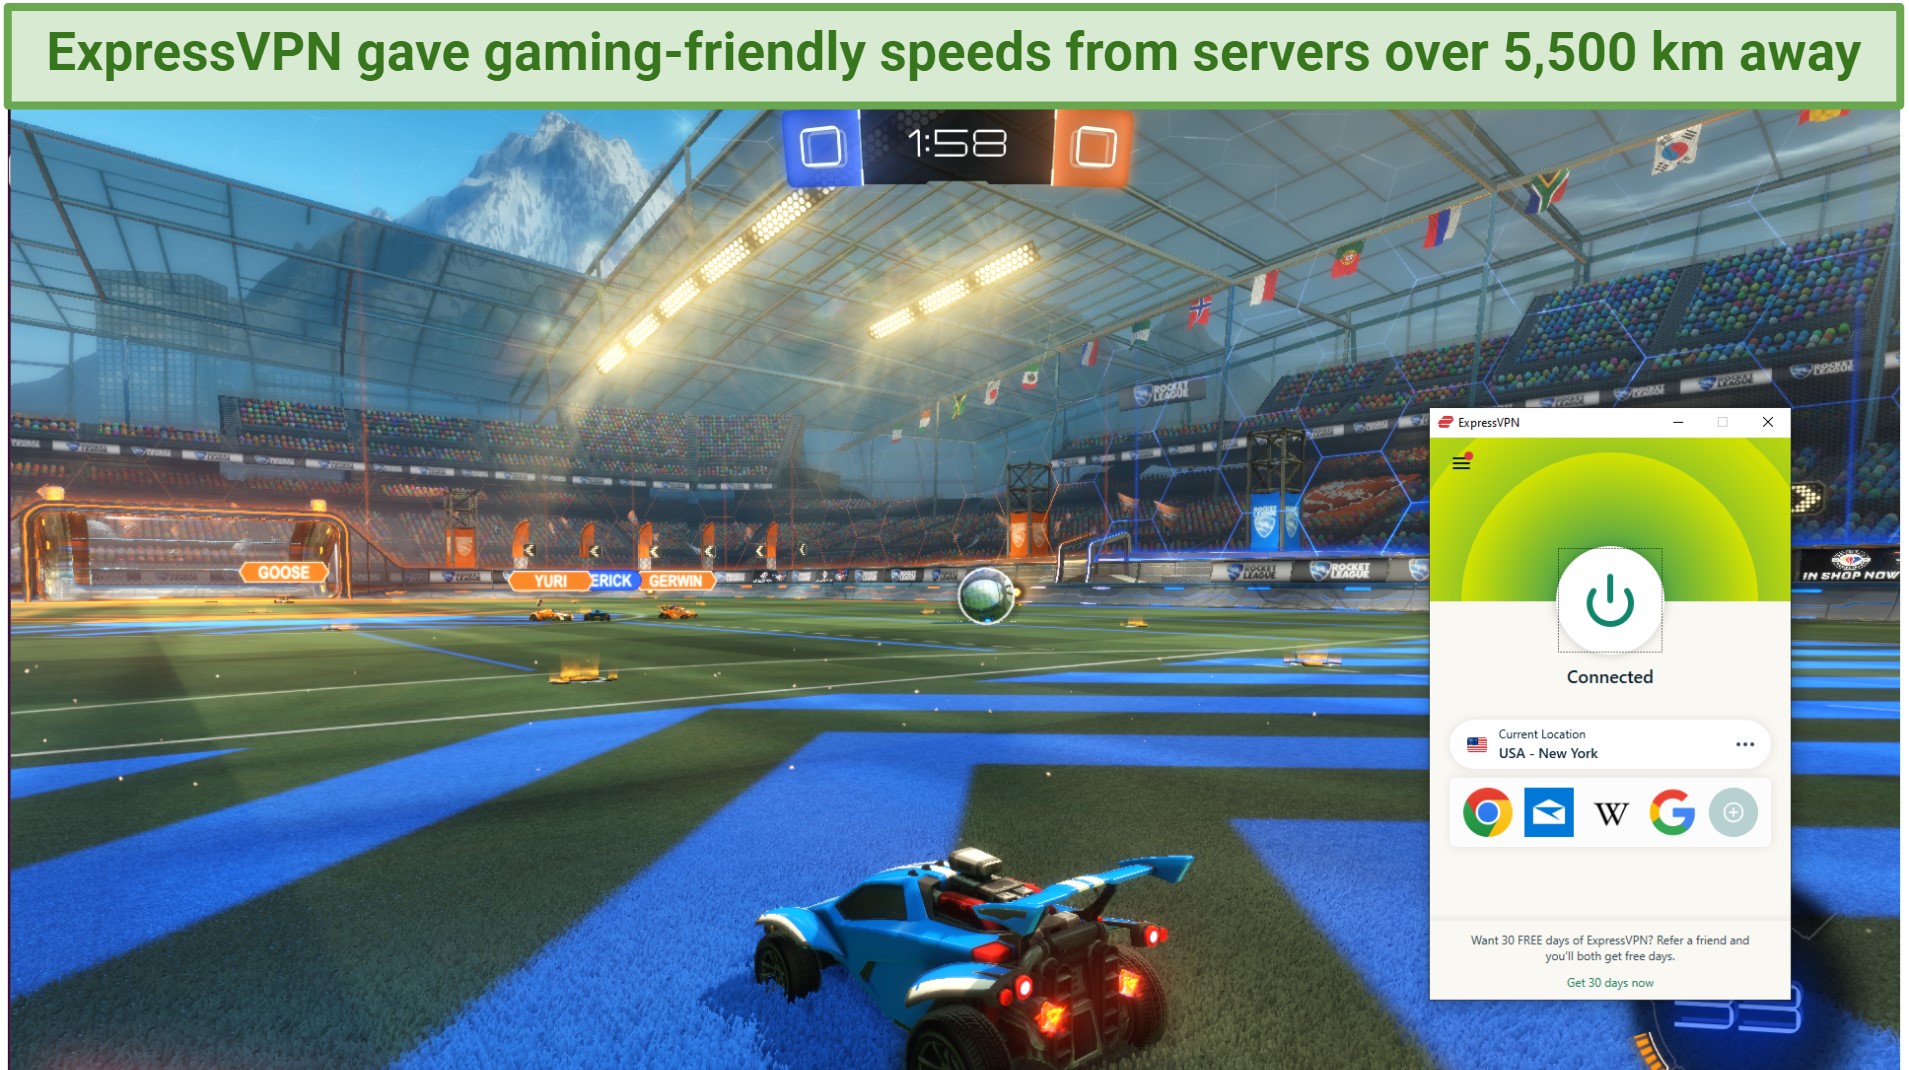 Screenshot showing the ExpressVPN app connected to a server in New York over an online game playing on a web browser